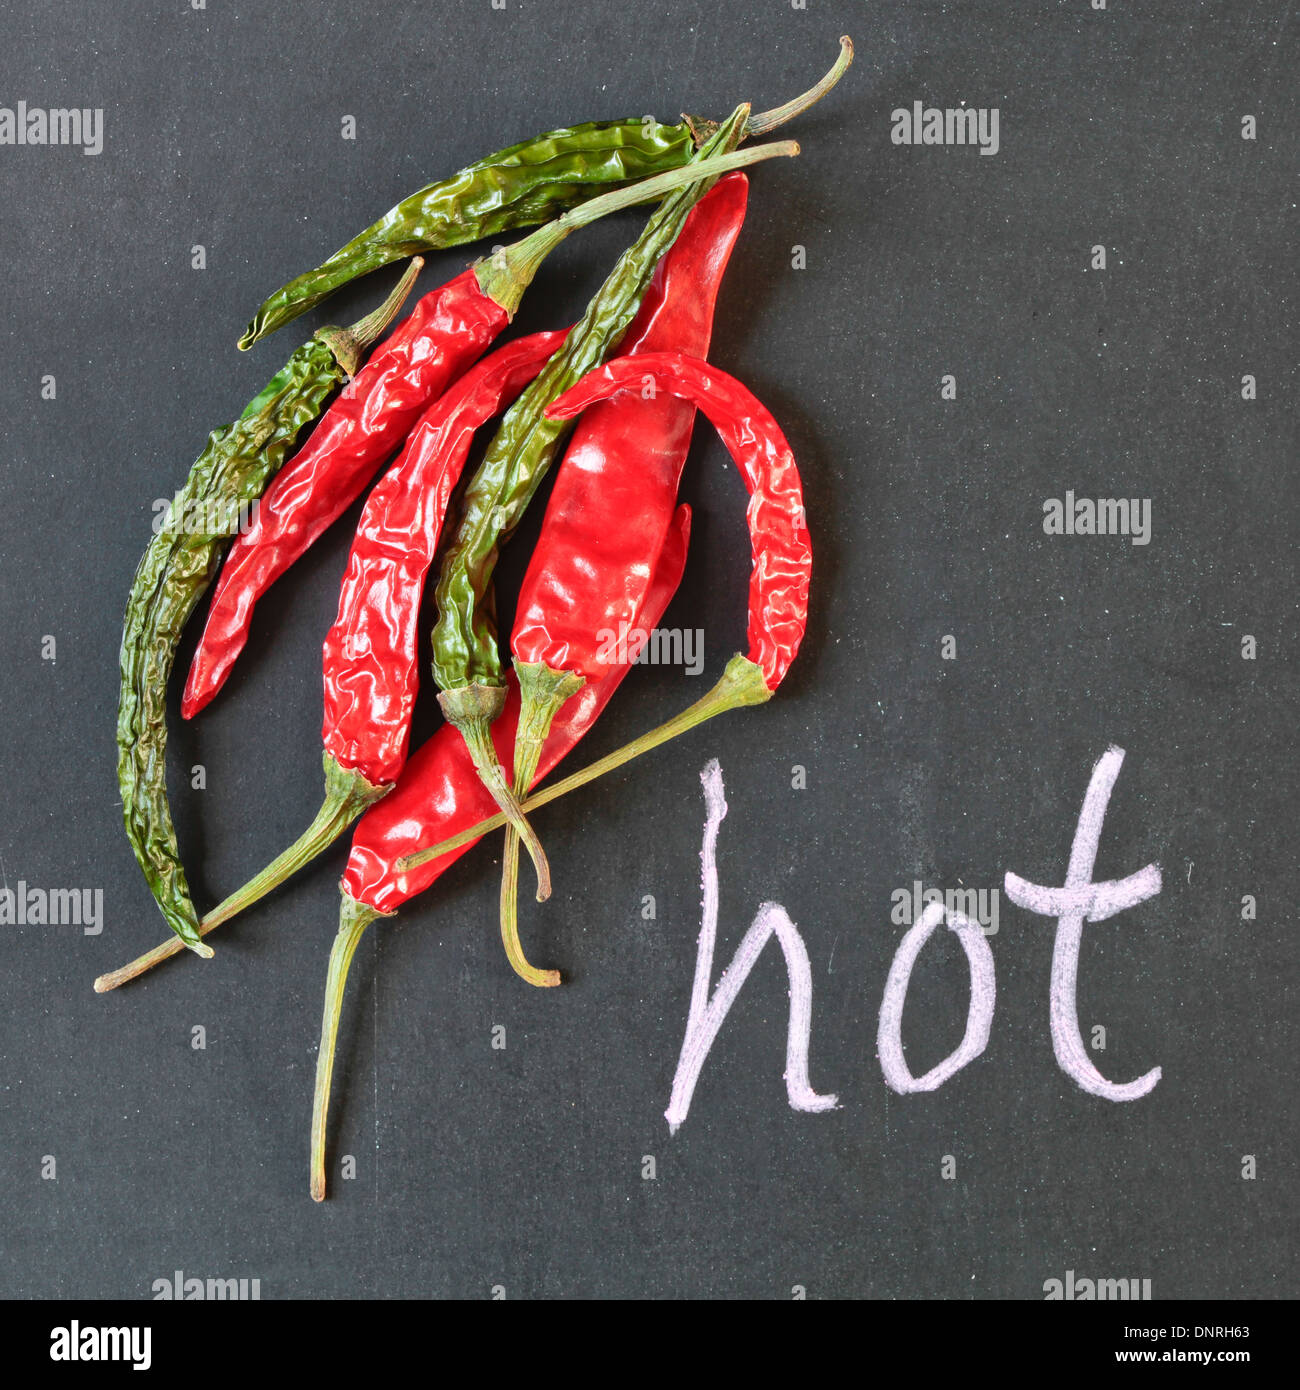 Green and red chilli peppers on a black surface Stock Photo